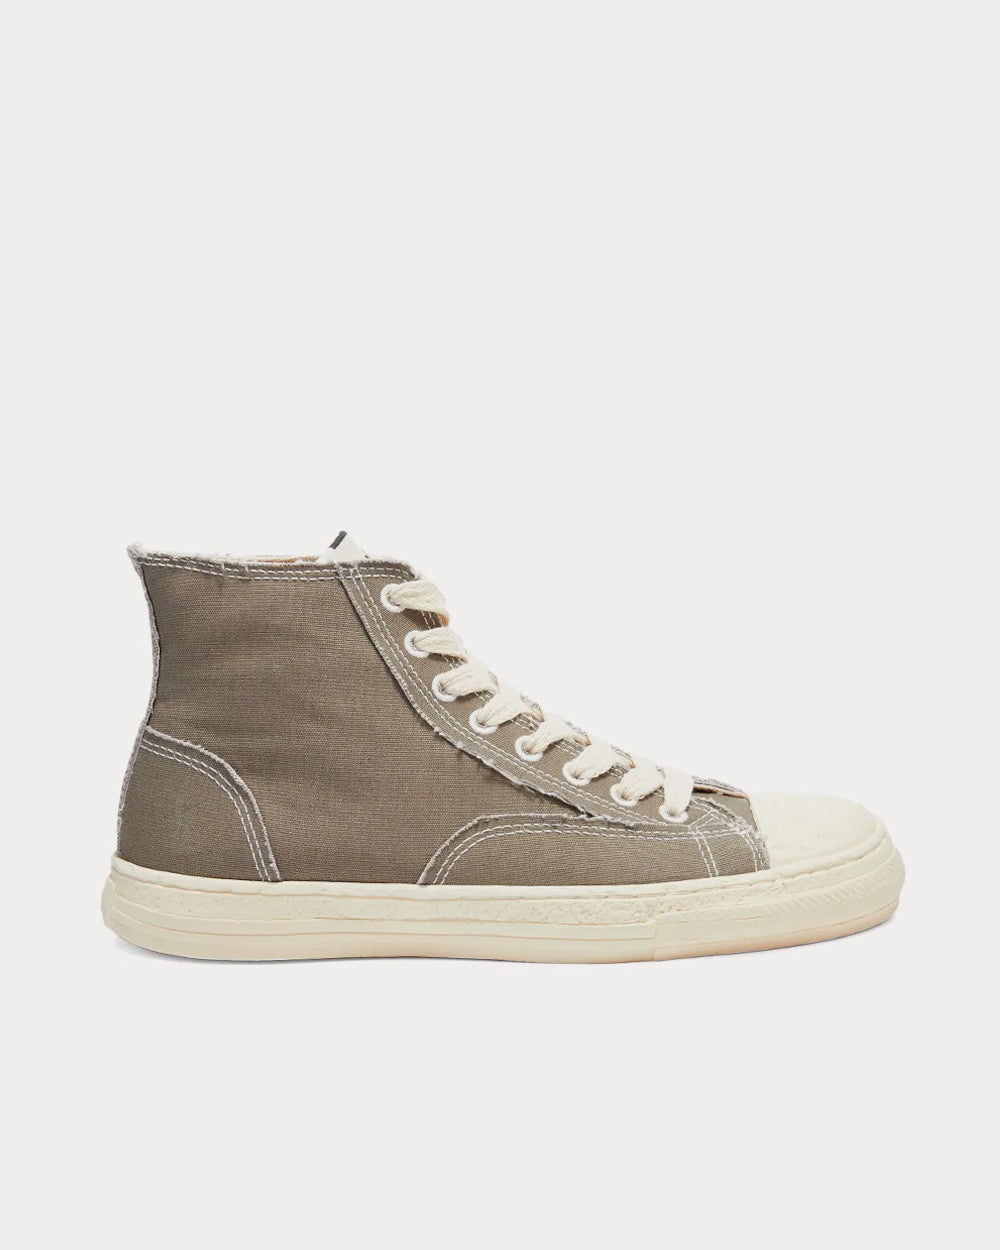 General Scale By Maison Mihara Yasuhiro - Past Sole Brown High Top Sneakers